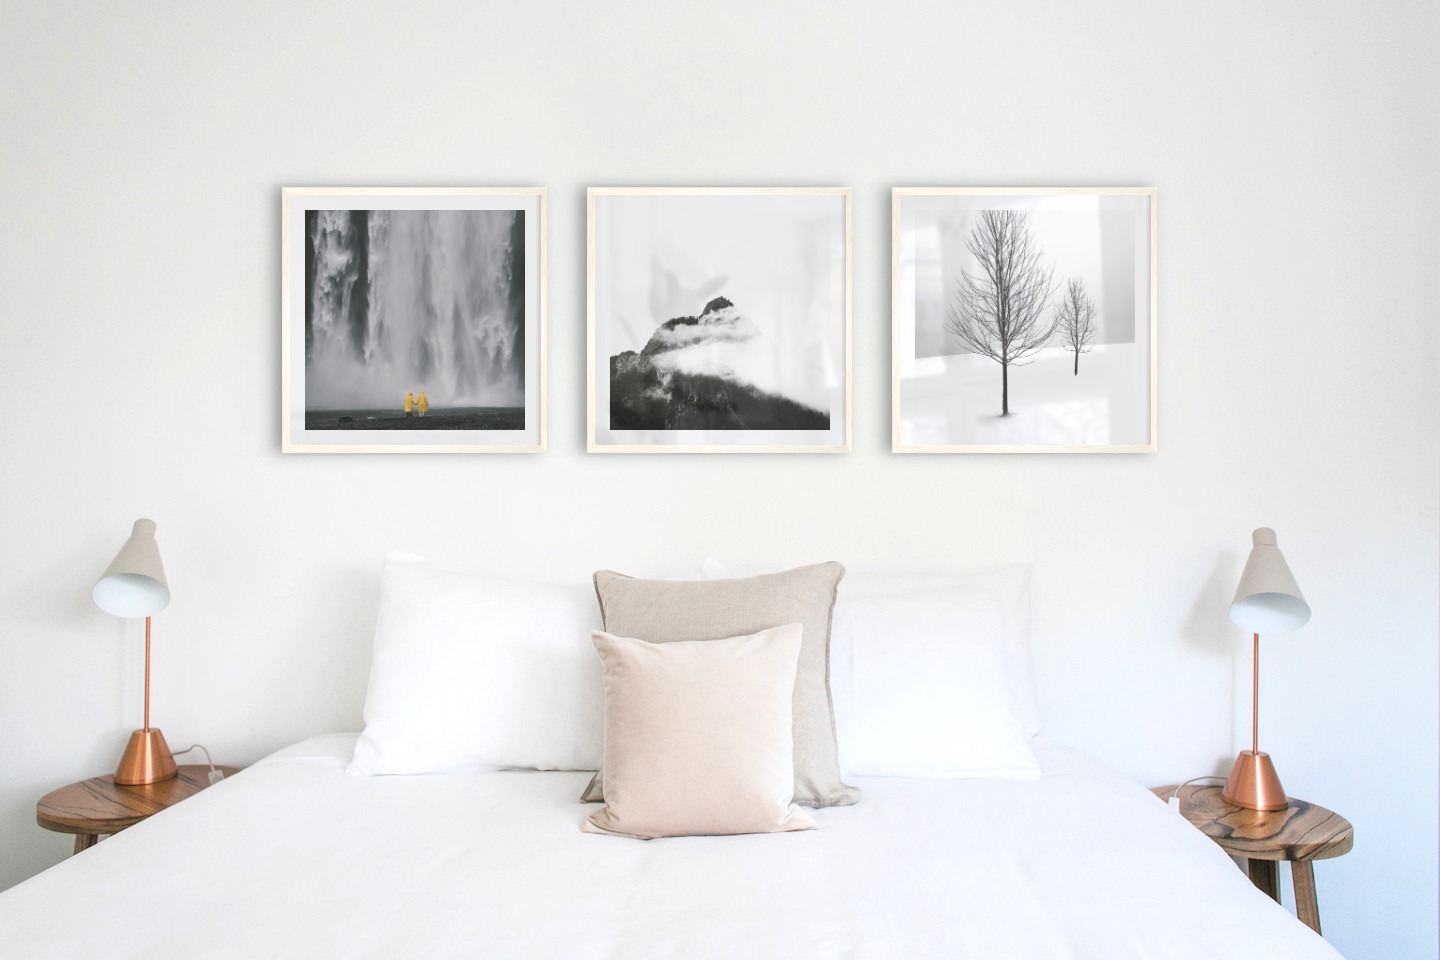 Gallery wall with picture frames in light wood in sizes 50x50 with prints "Waterfall with people", "Mountain peaks in fog" and "Trees in the snow"